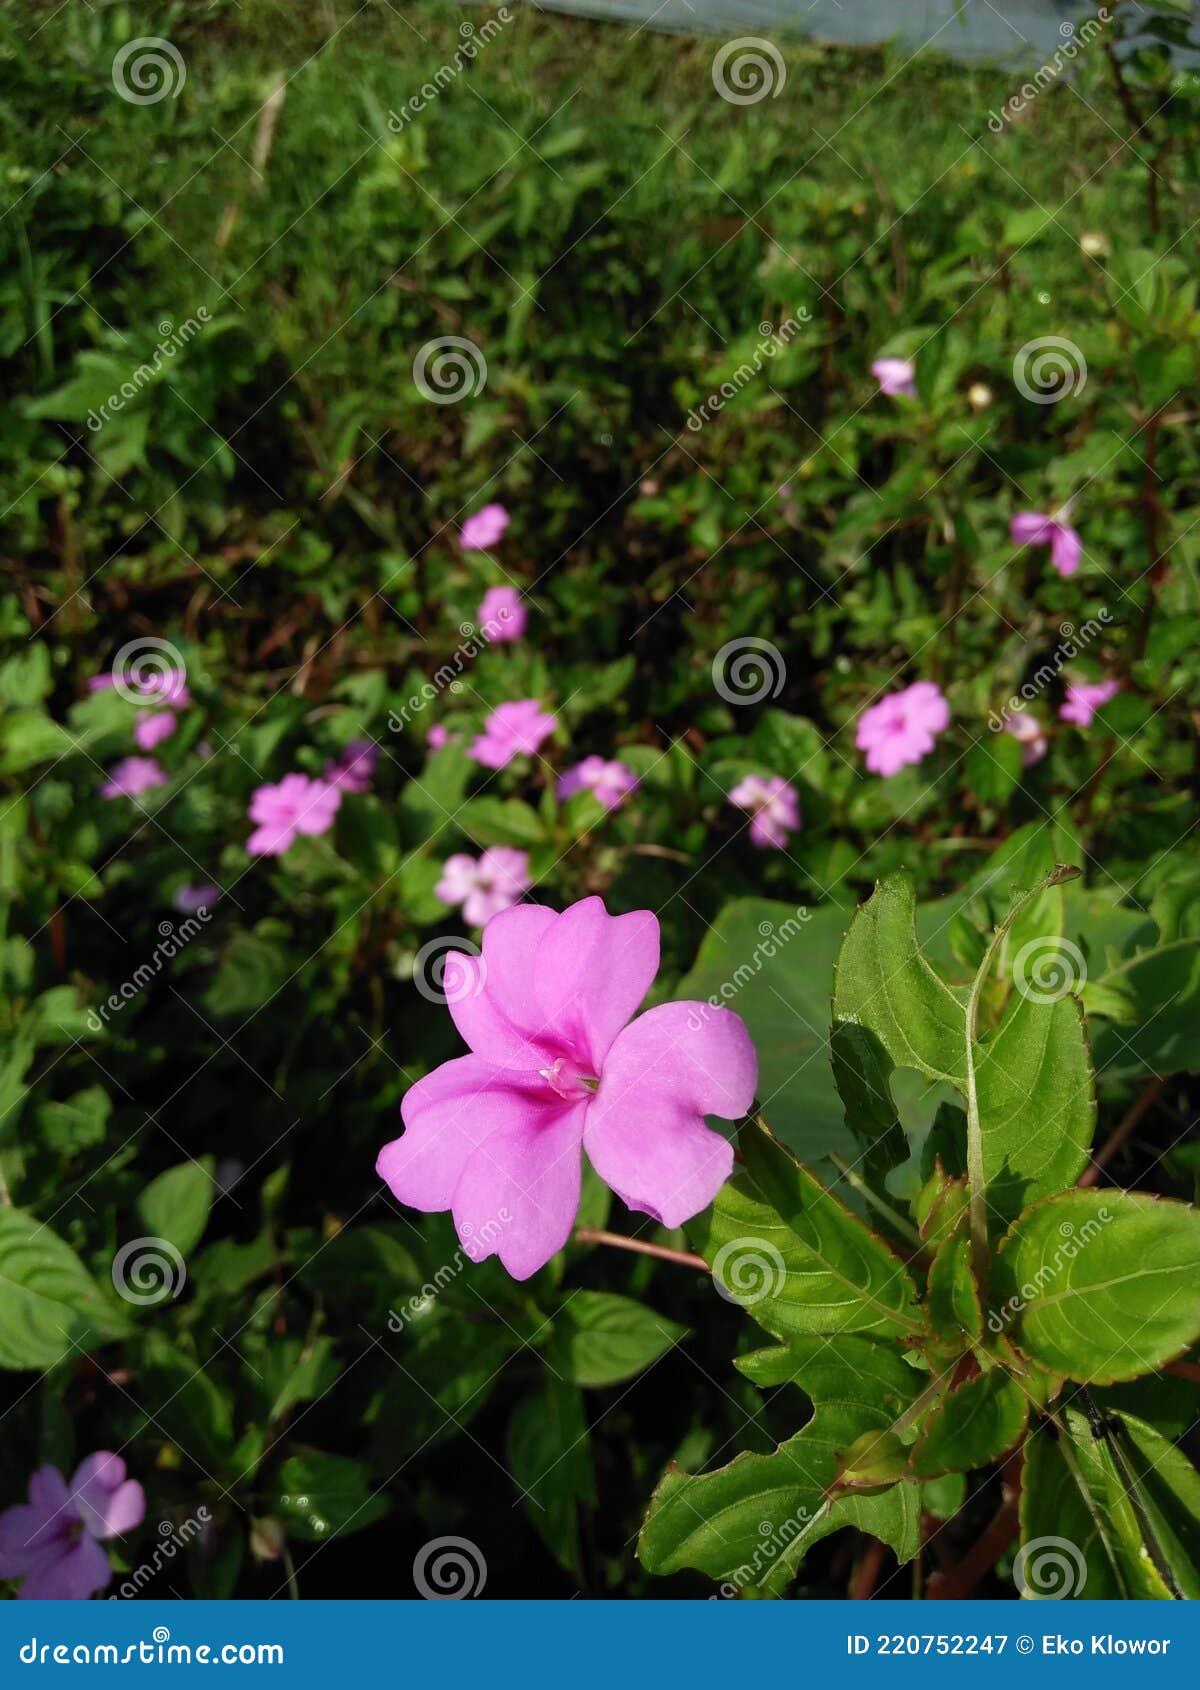 impatiens walleriana is a species of plant in the family balsaminaceae.  this species is also part of the order ericales